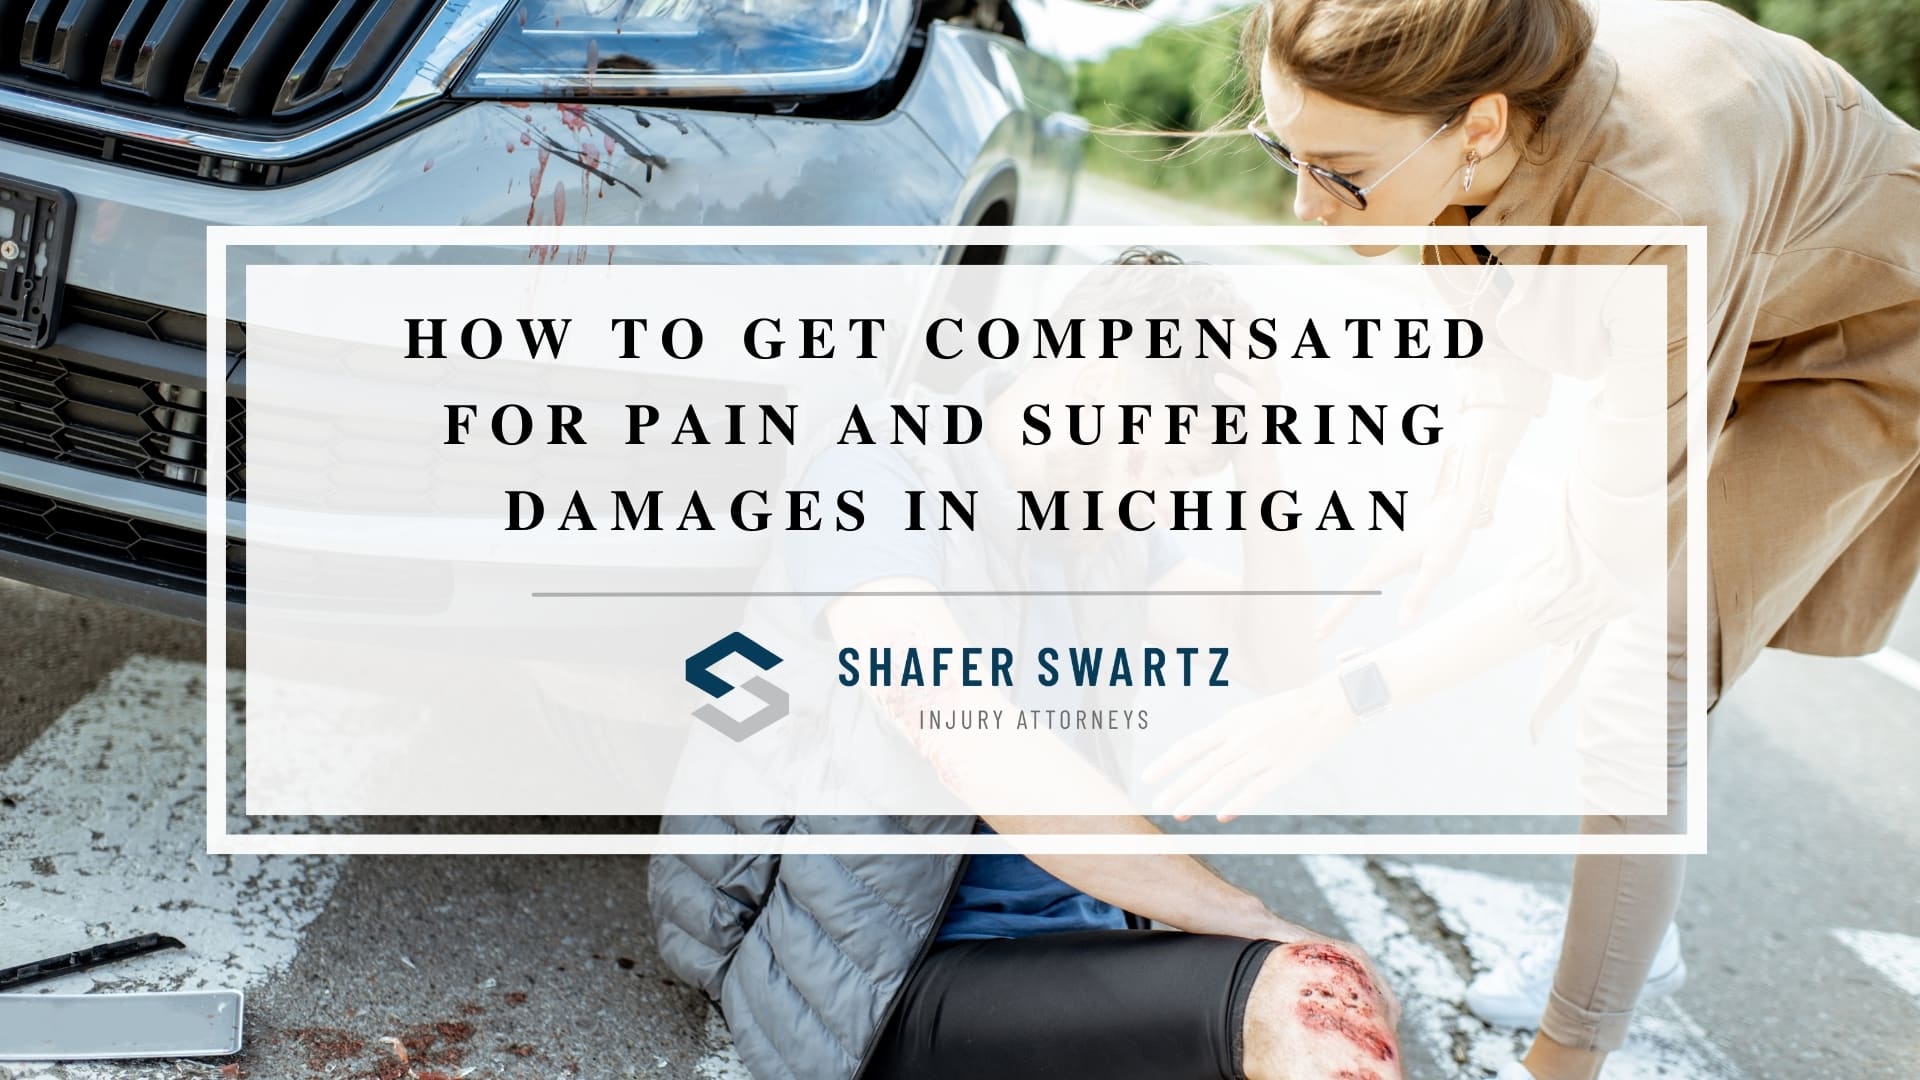 Featured image of how to get a compensated for pain and suffering damages in Michigan